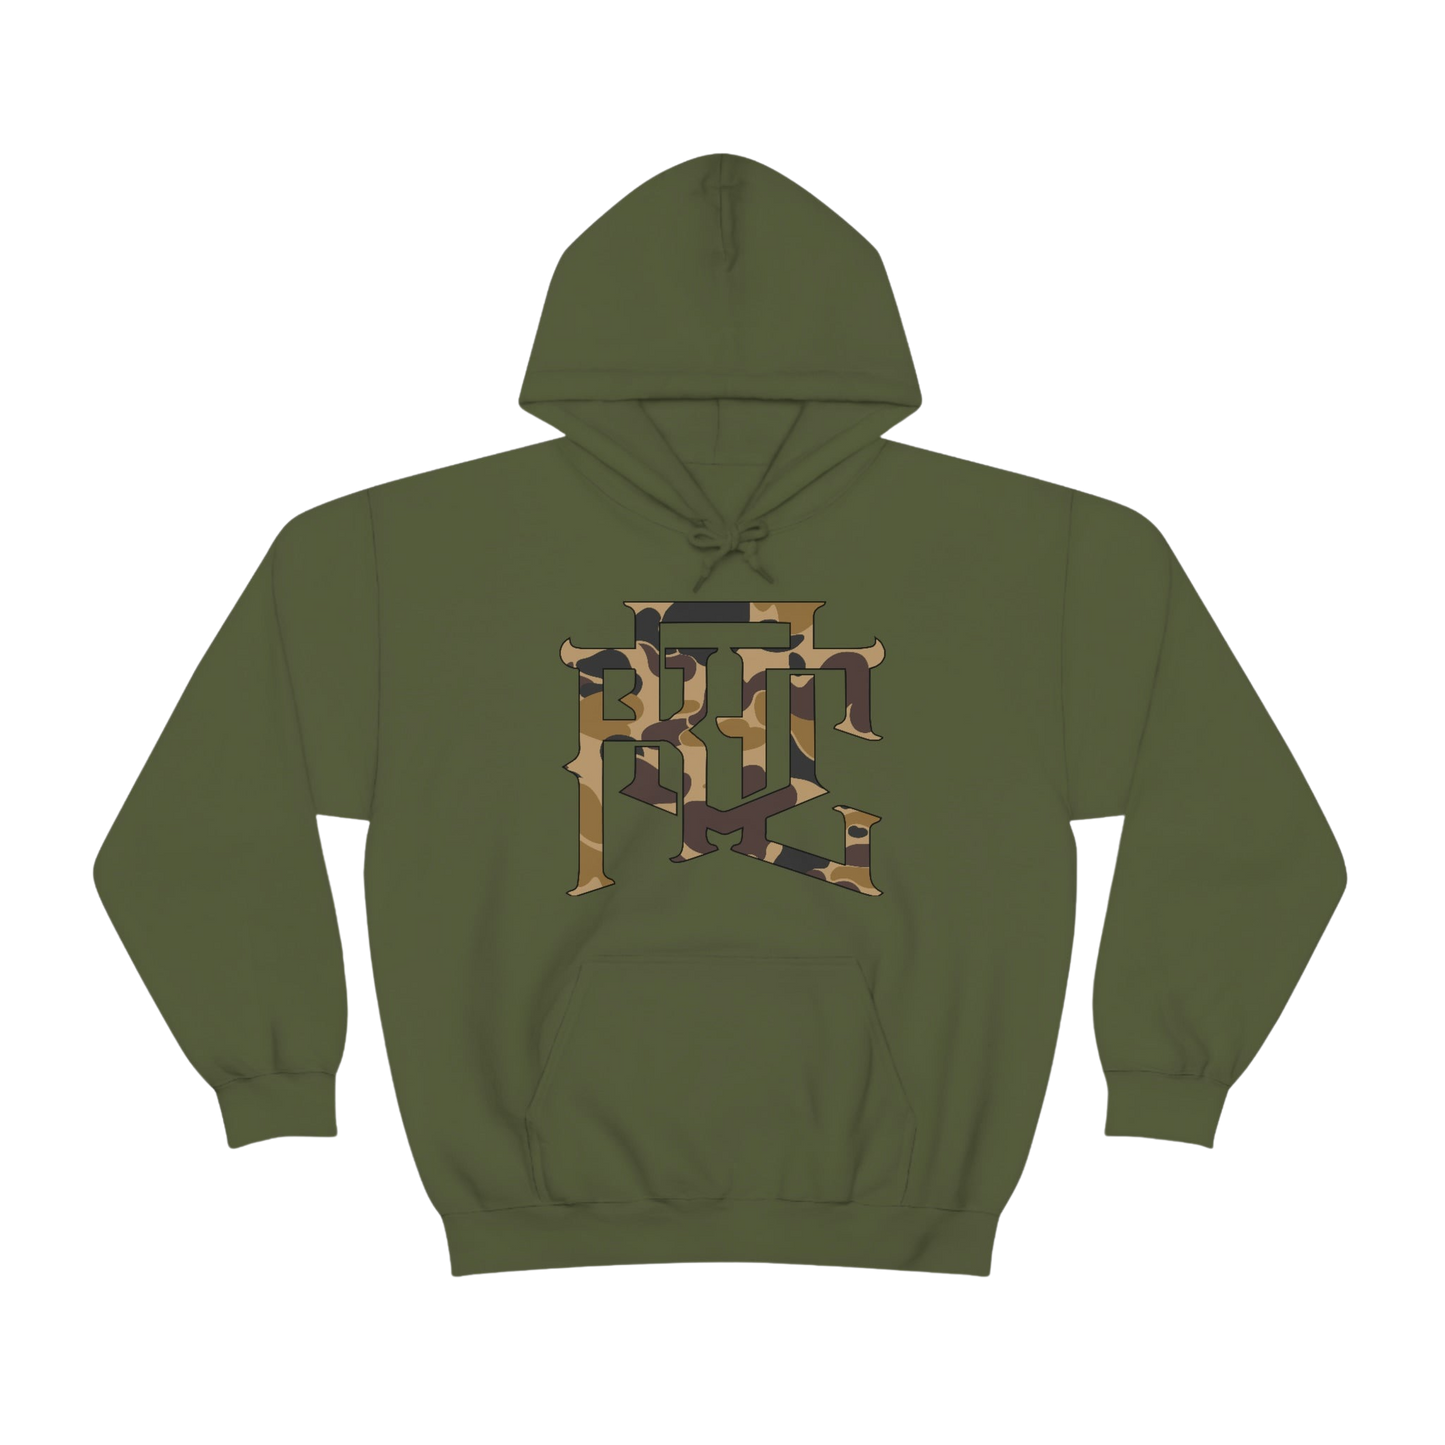 The Camo ORC hoodie